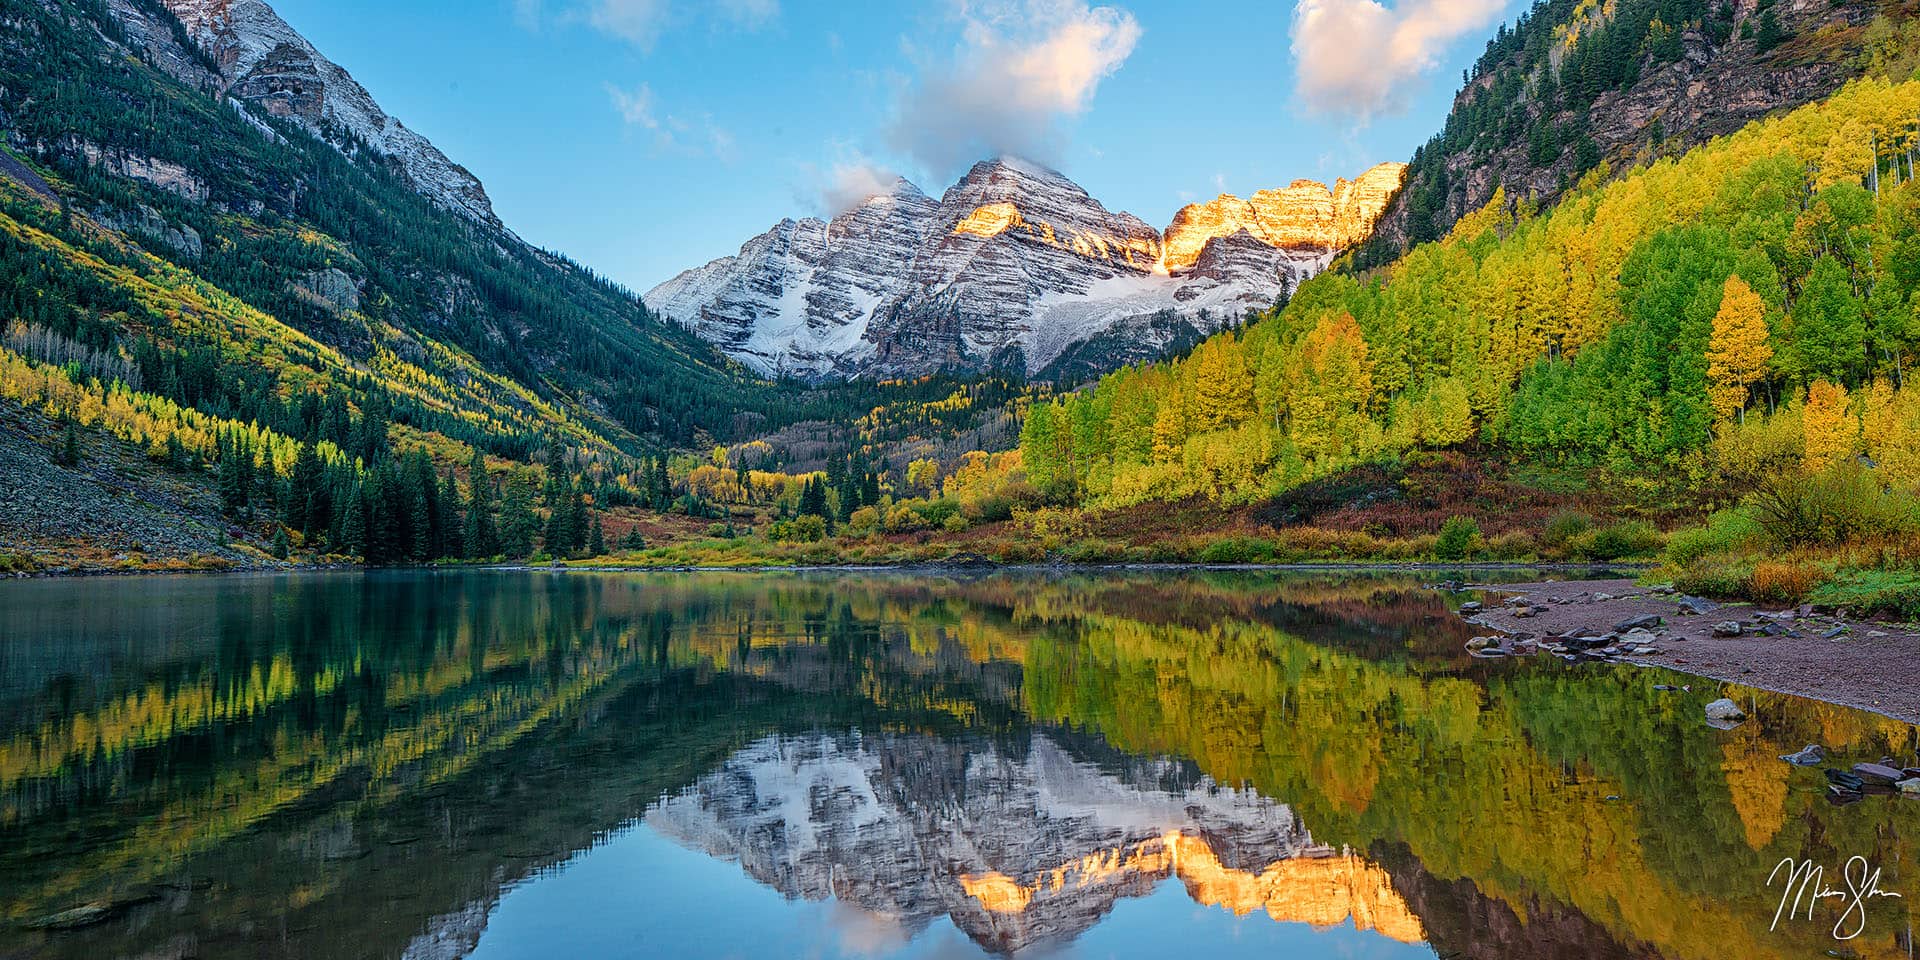 Maroon Bells Photography: Sunrise at the Maroon Bells